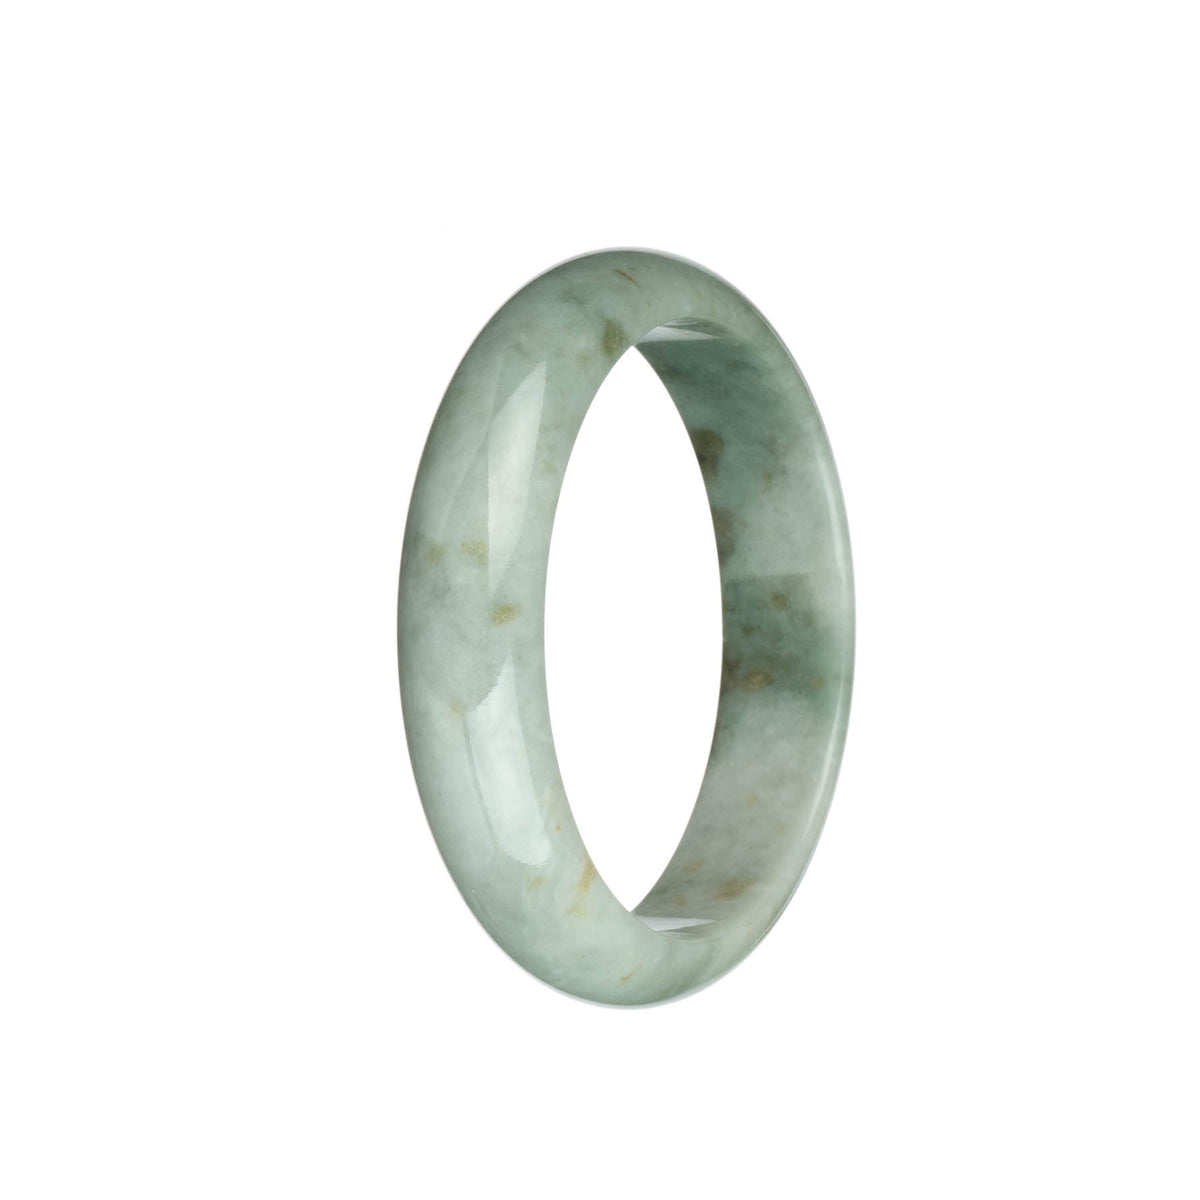 Authentic Type A Light Grey andf Light Greenwith Brown Partterns Traditional Jade Bangle Bracelet - 59mm Half Moon